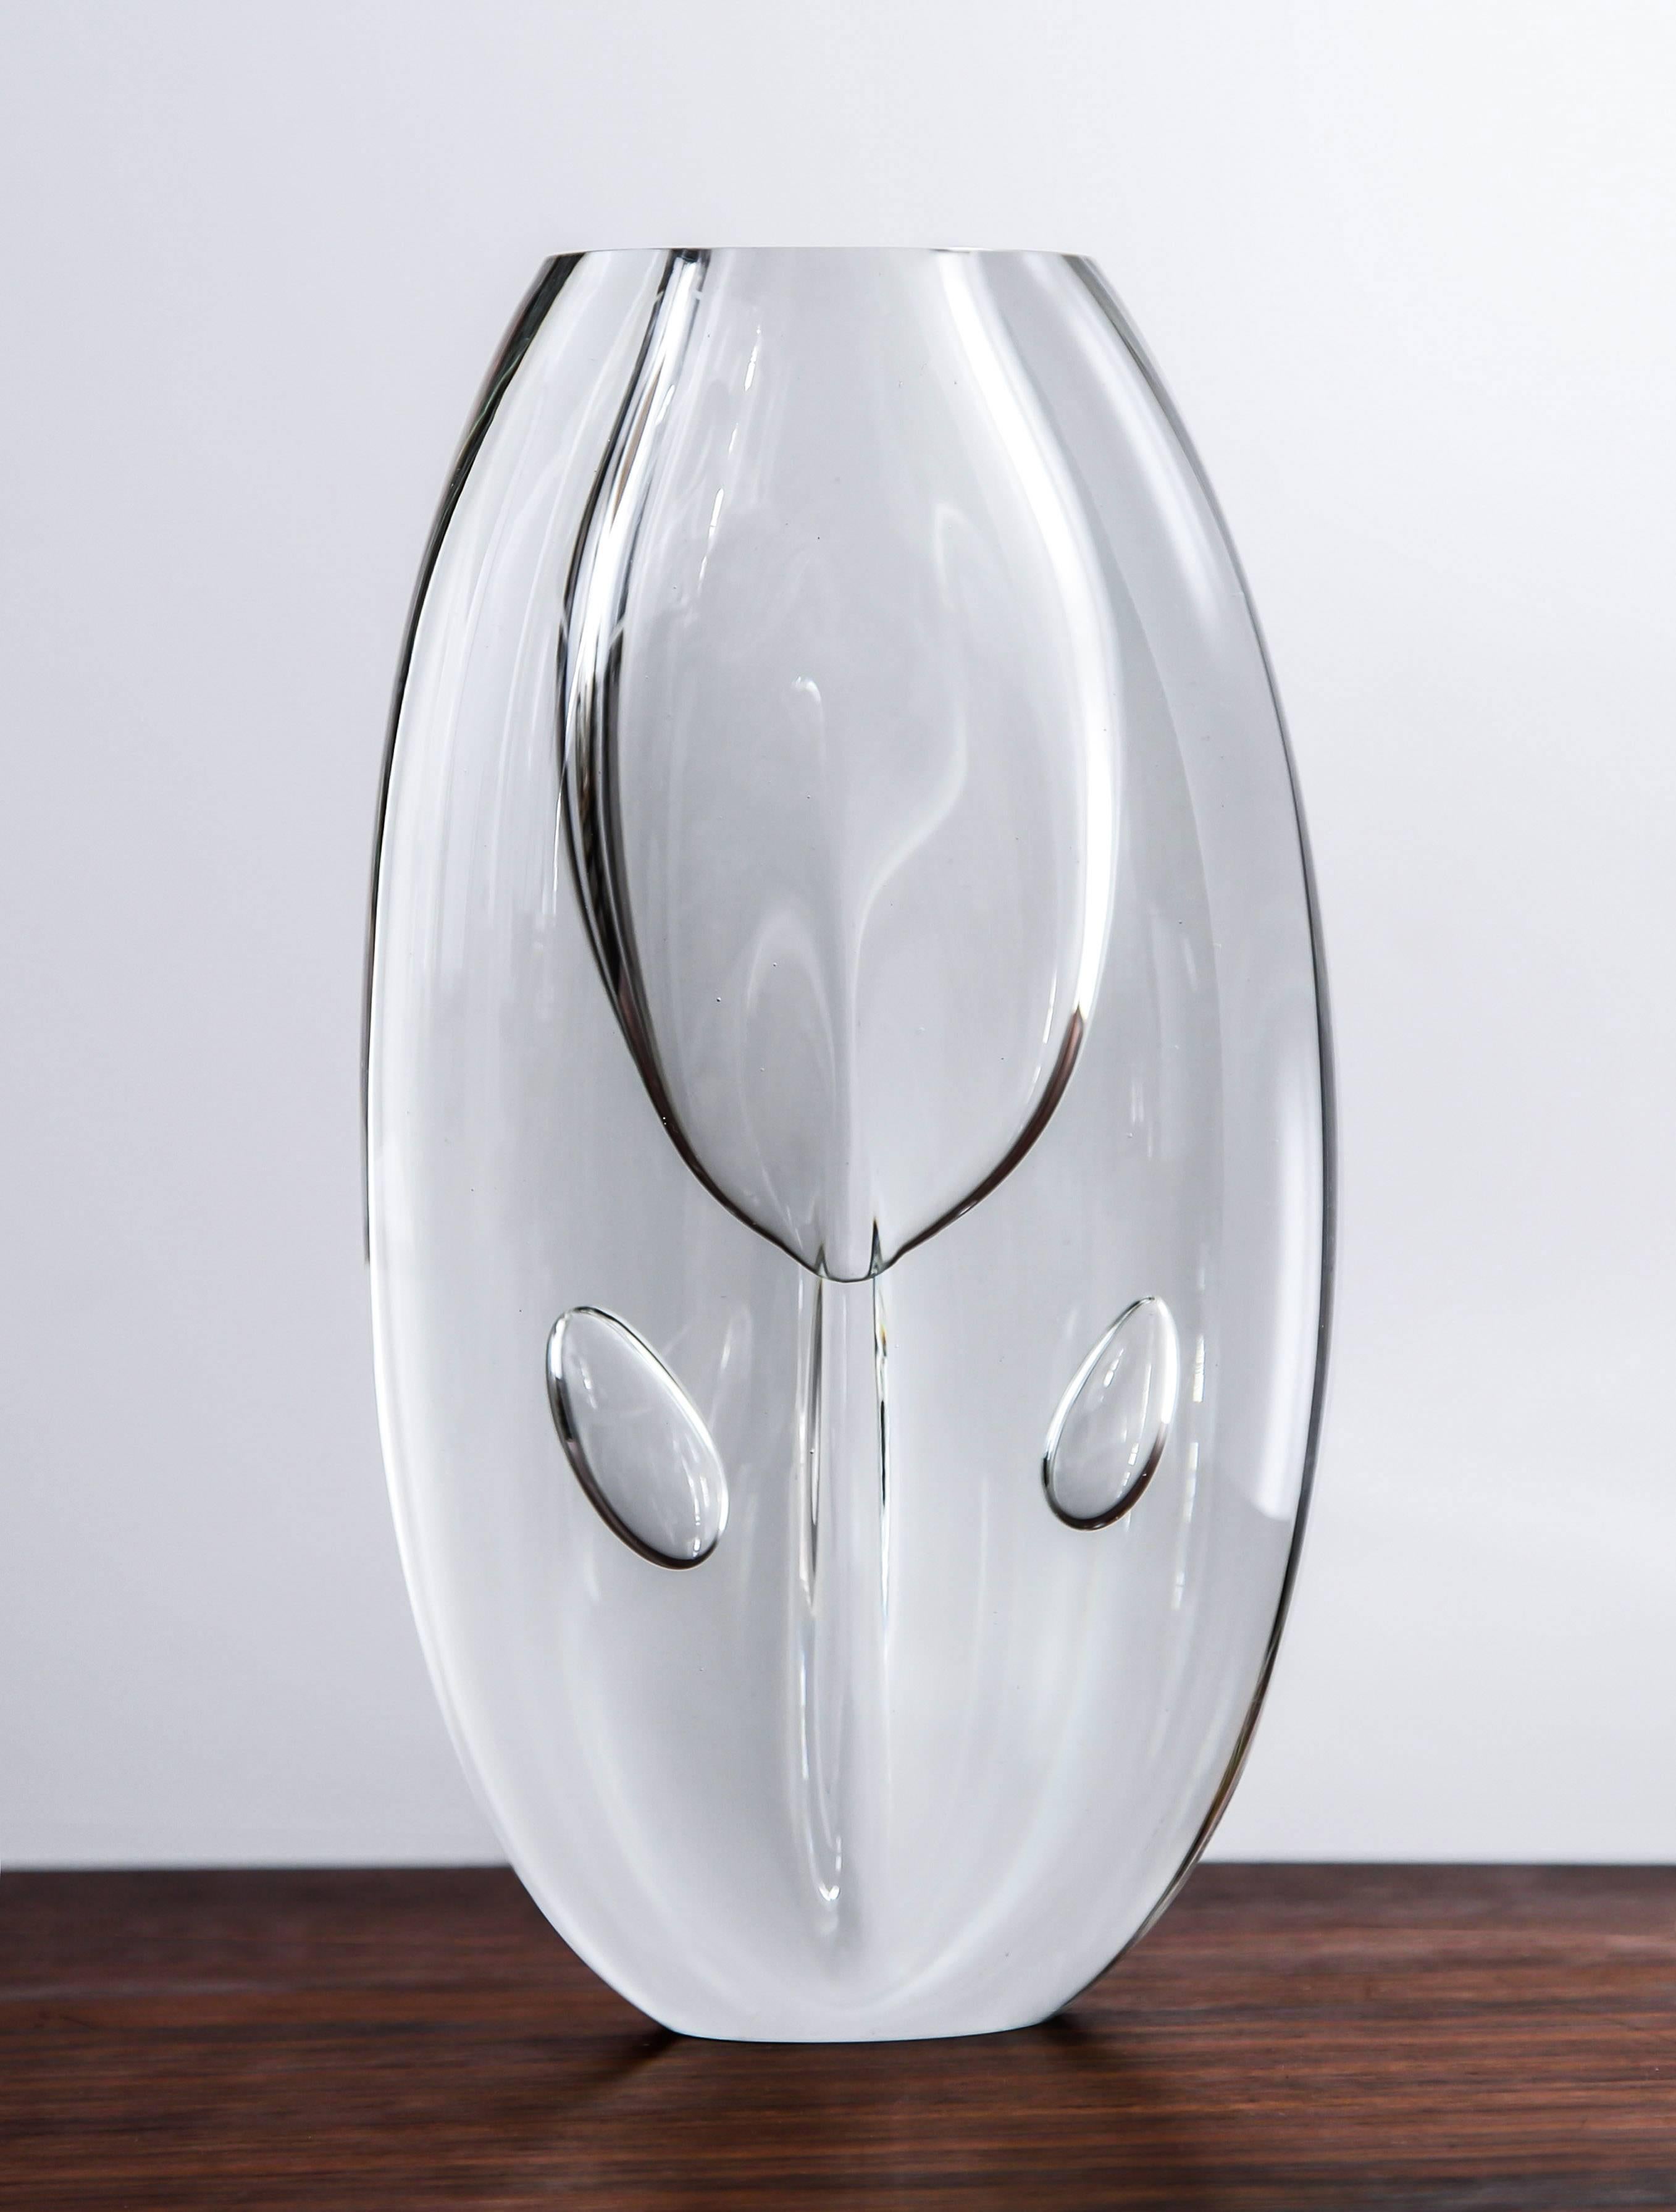 Timo Sarpaneva

Claritas vase

Iittala Oy (Iittala Glassworks), Finland, 1985.
Mould blown, cut and polished glass.
Height 28 cm, width 13.9 cm, depth 8.3 cm.

Large and rare art object / vase by Timo Sarpaneva (Finnish, 1926-2006) from the